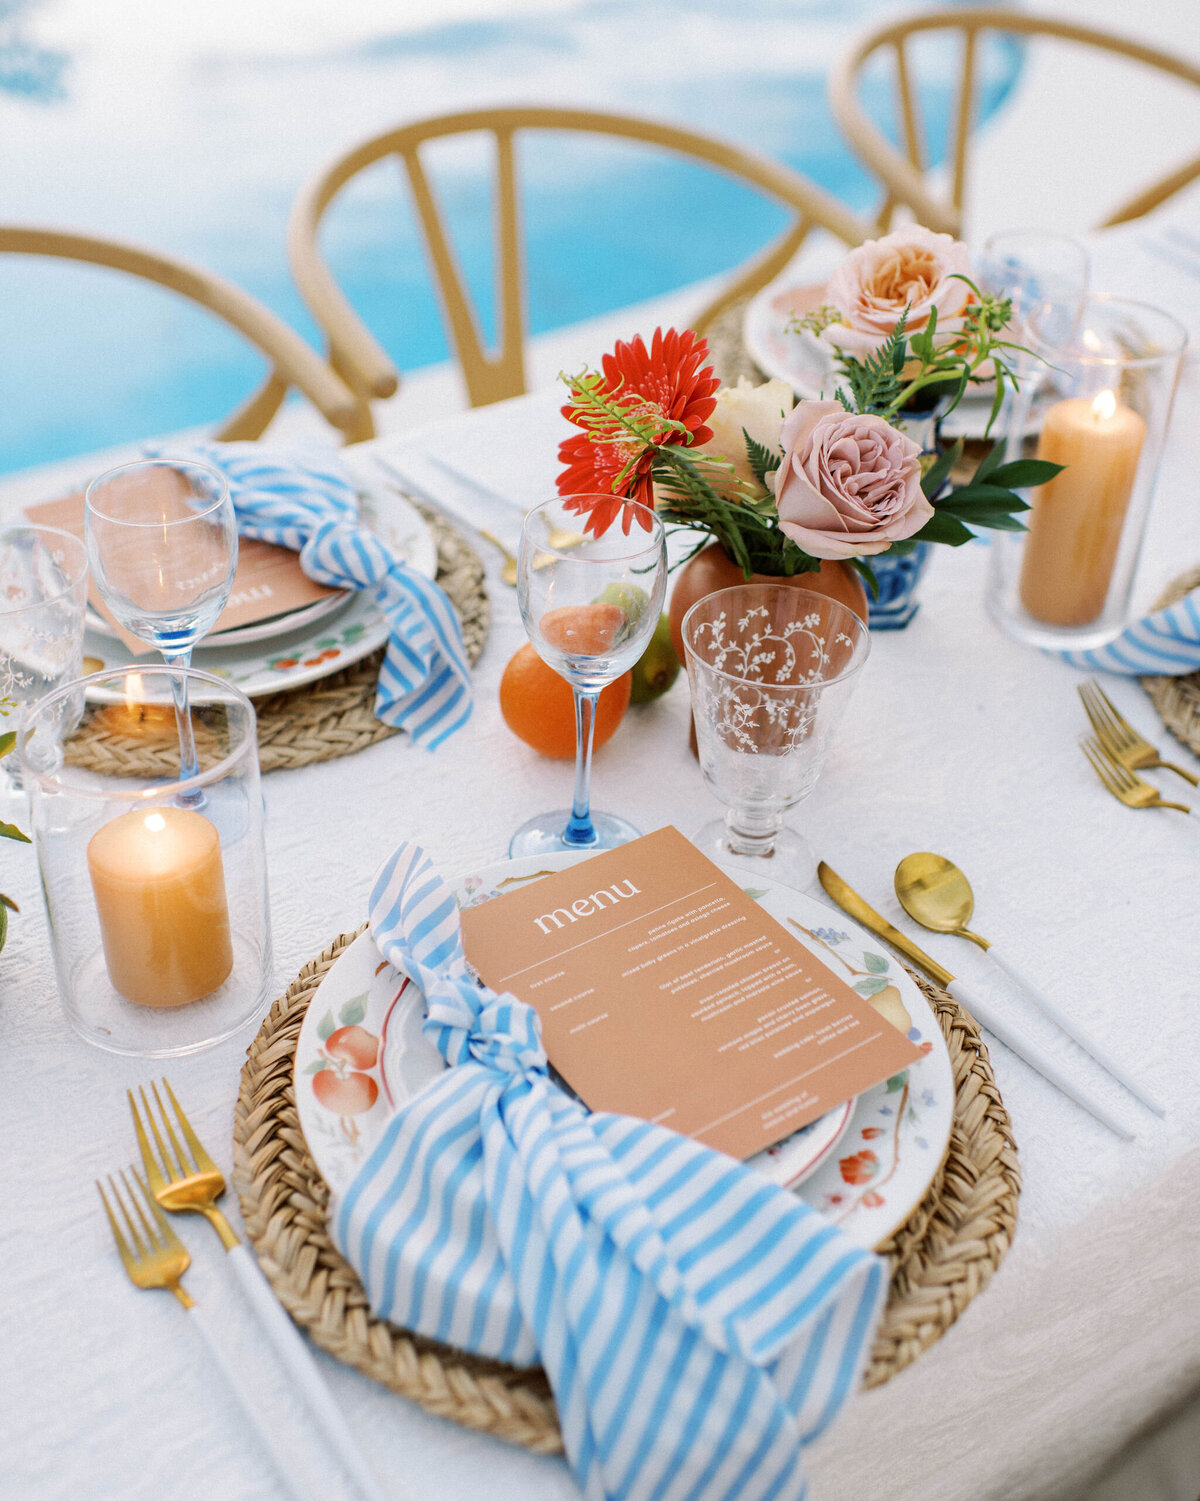 Cabo and Tulum Mexico Destination Wedding Inspiration, tropical and modern luxury wedding table design by Intimate Destination Wedding Planner Rebekah Bronte